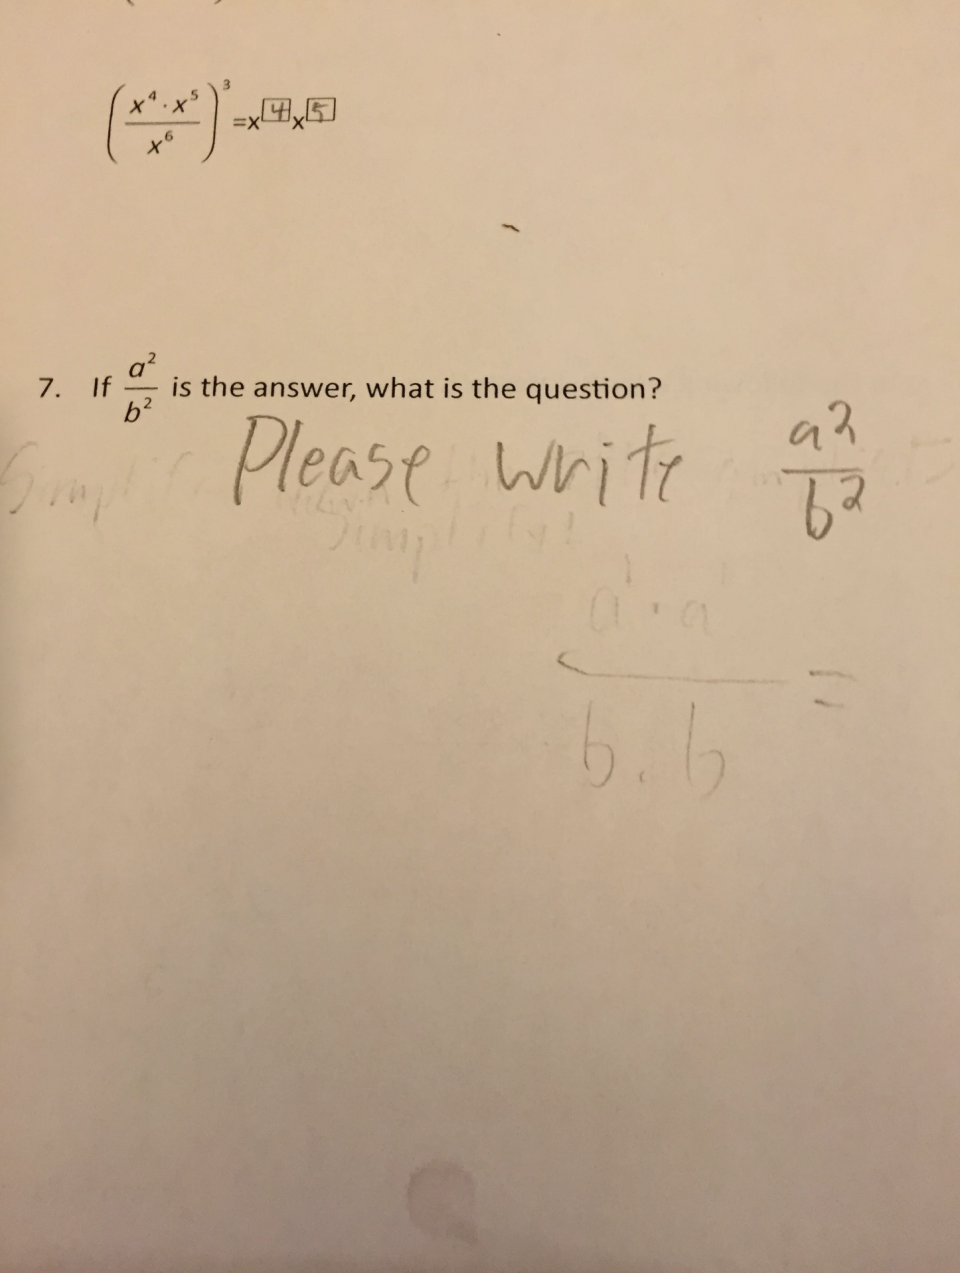 Student answered the question "If a2 / b2 is the answer, what is the question?" with "Please write a2 / b2"